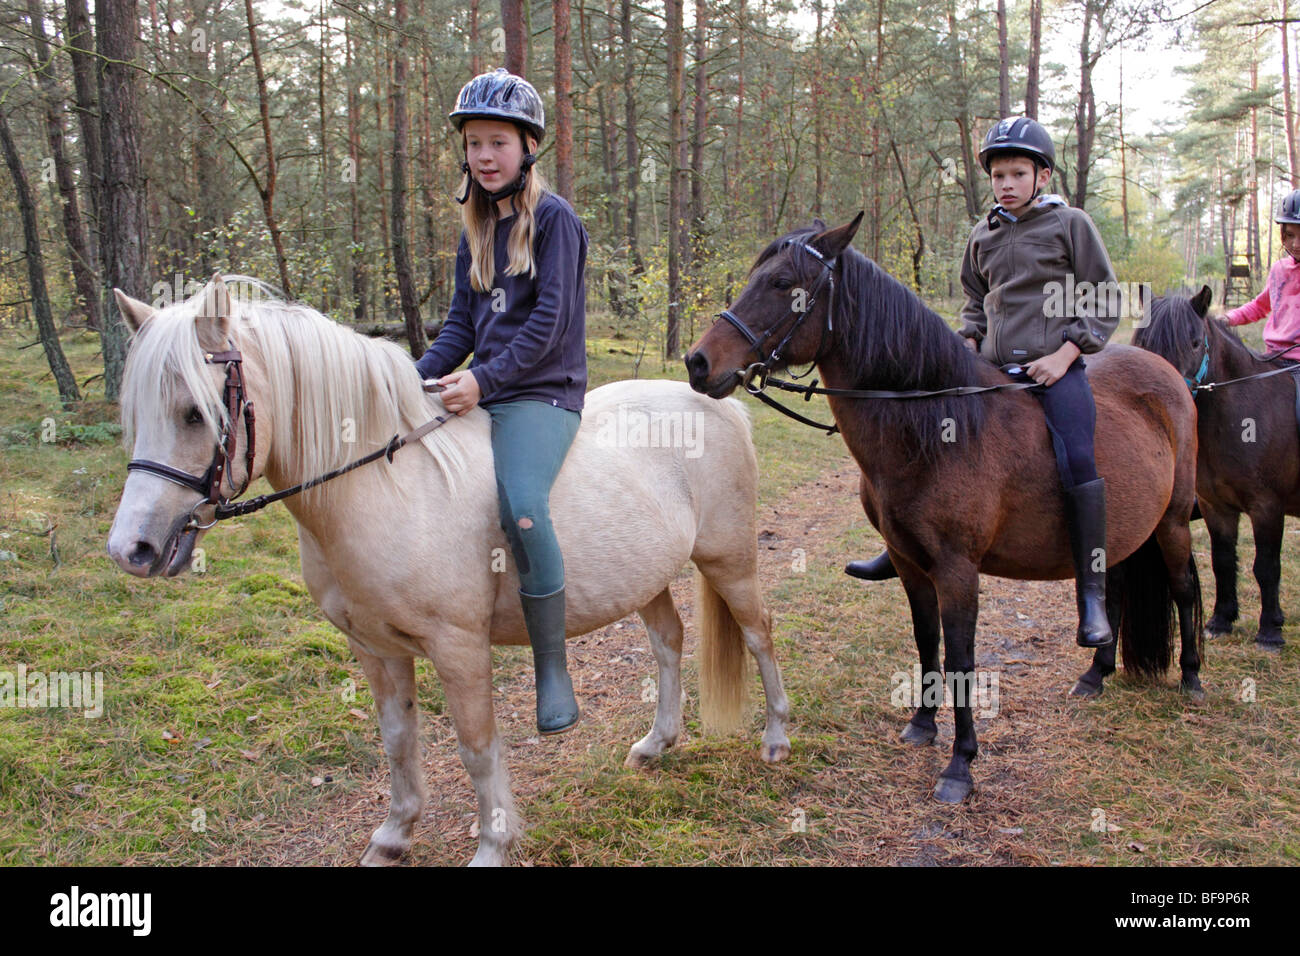 children horseback riding in a forest Stock Photo